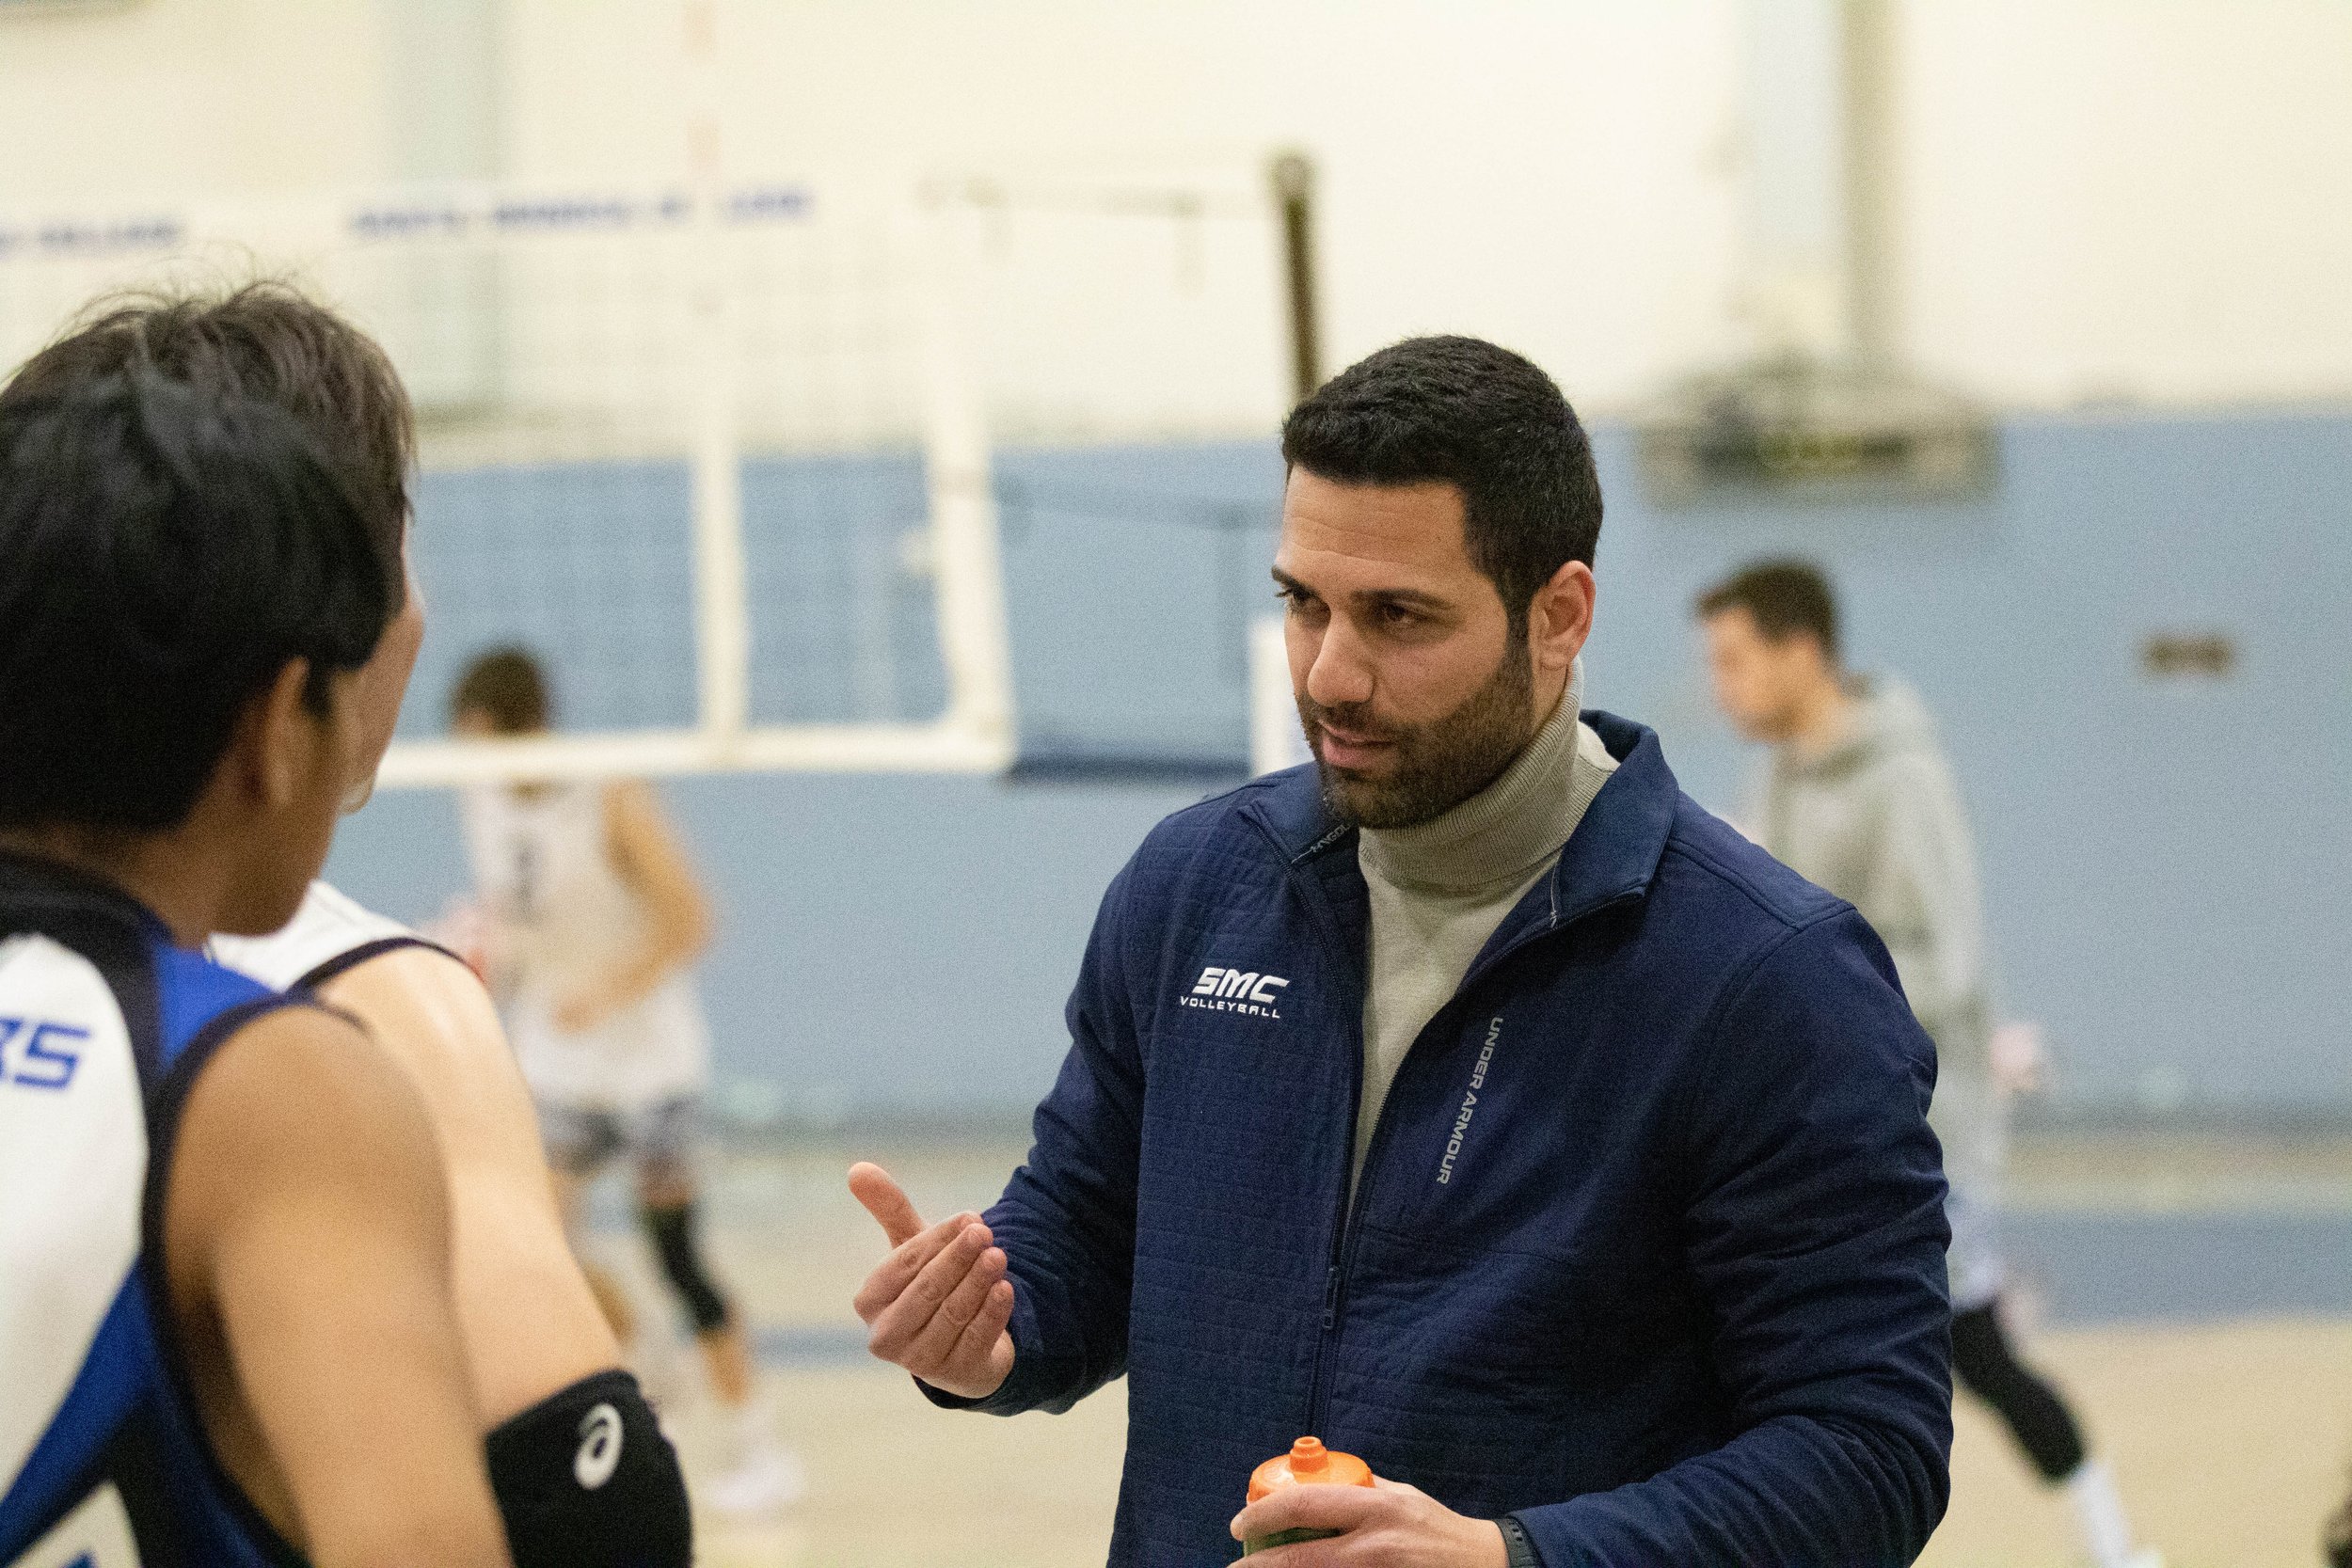  Santa Monica College Men's Volleyball head coach Liran Zamir speaking to the Corsairs during a timeout in the third set of a home game against Irvine Valley College Lasers in Santa Monica, Calif., on Friday, Feb. 24, 2023. The match ended with the C